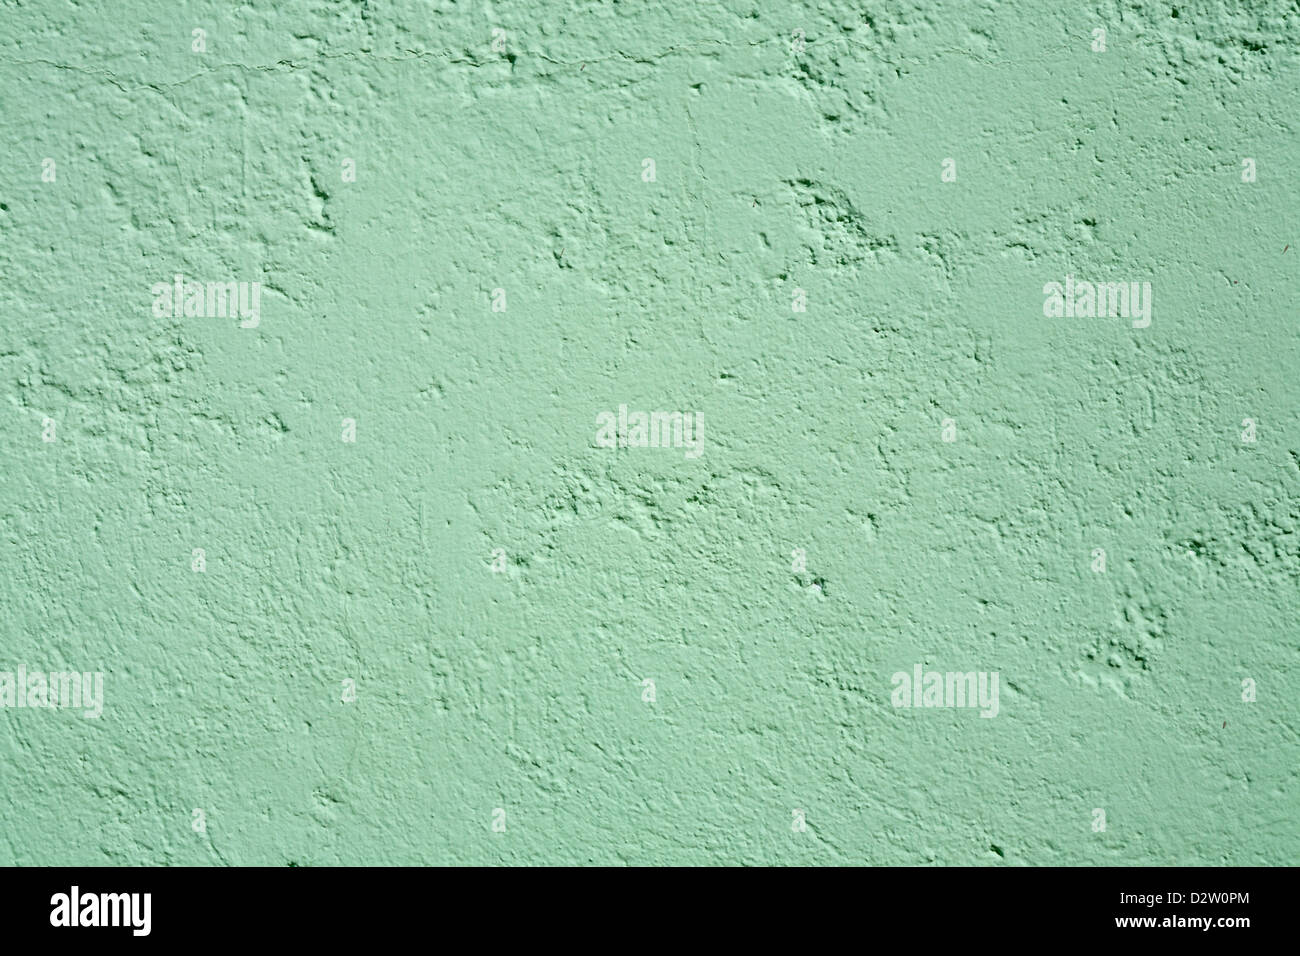 Close up detail of vertical wall showing texture of blue green painted slightly pitted surface Stock Photo